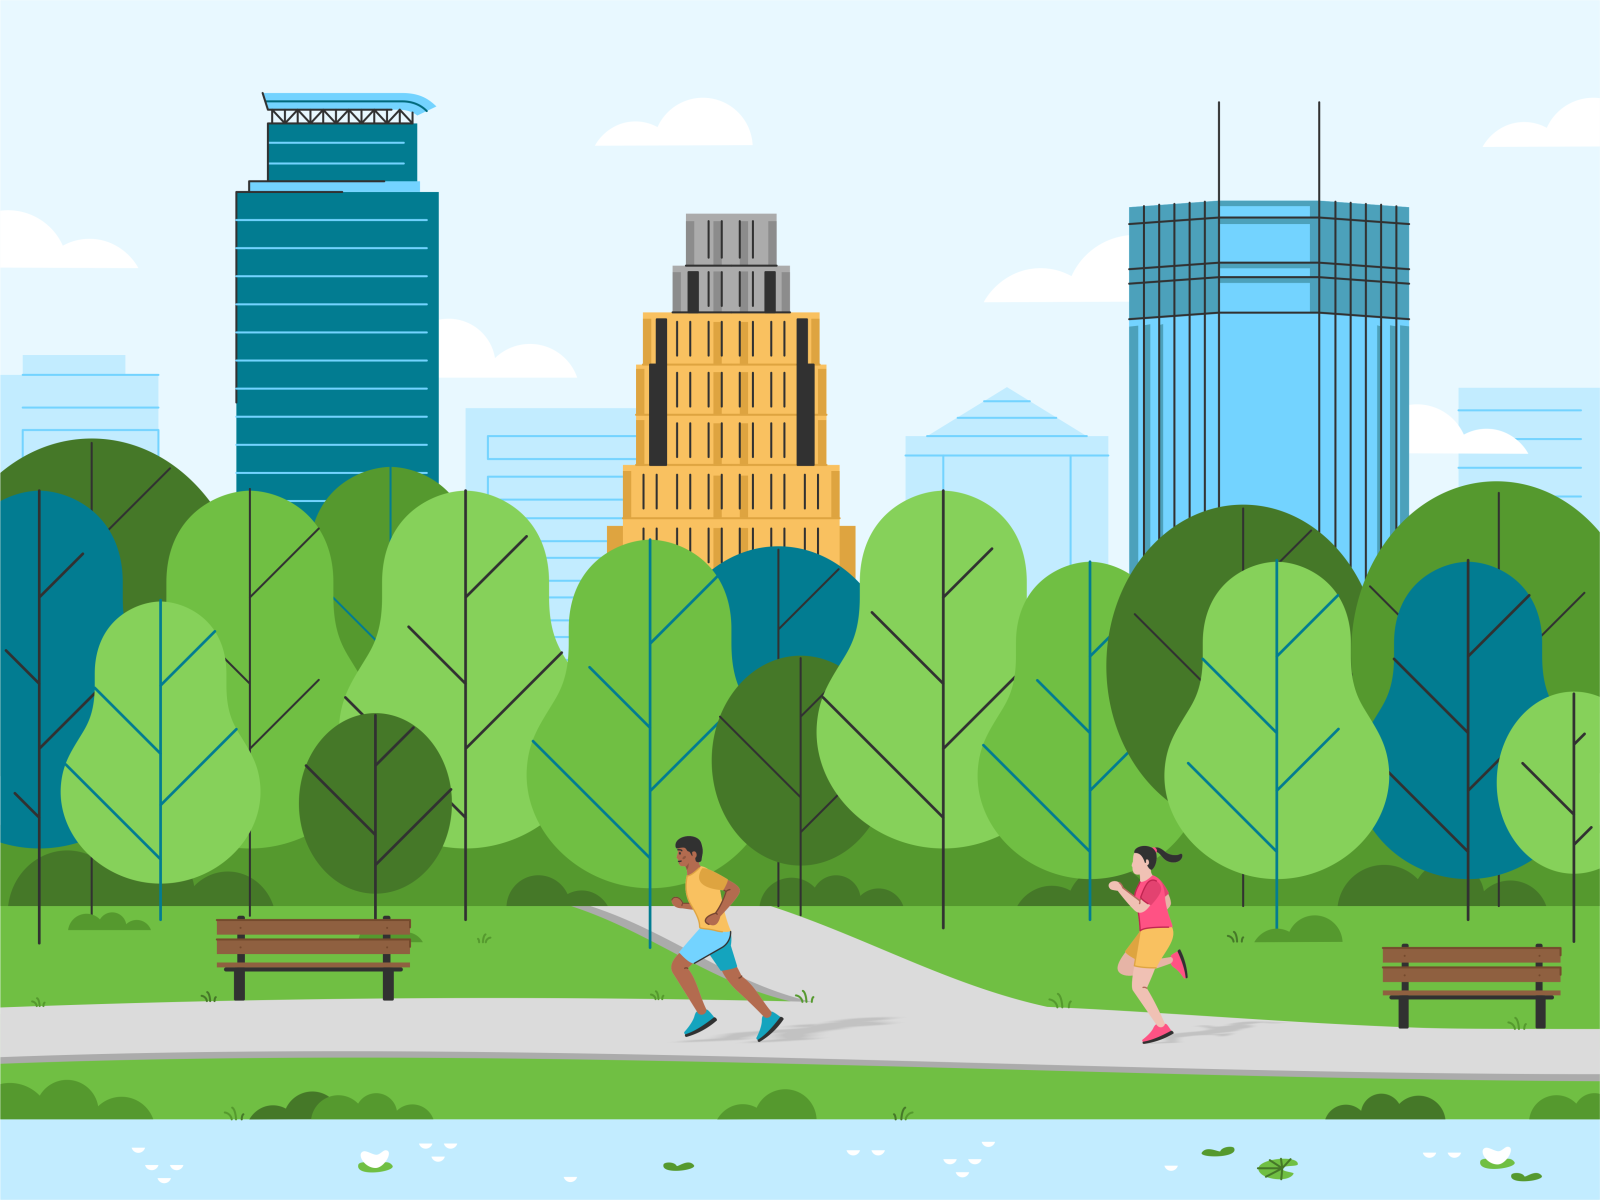 Minneapolis 🏙️ america buildings capella tower characters city color ids tower illustration lake michigan landscape line art park running skyline town tree usa vector wells fargo center minneapolis